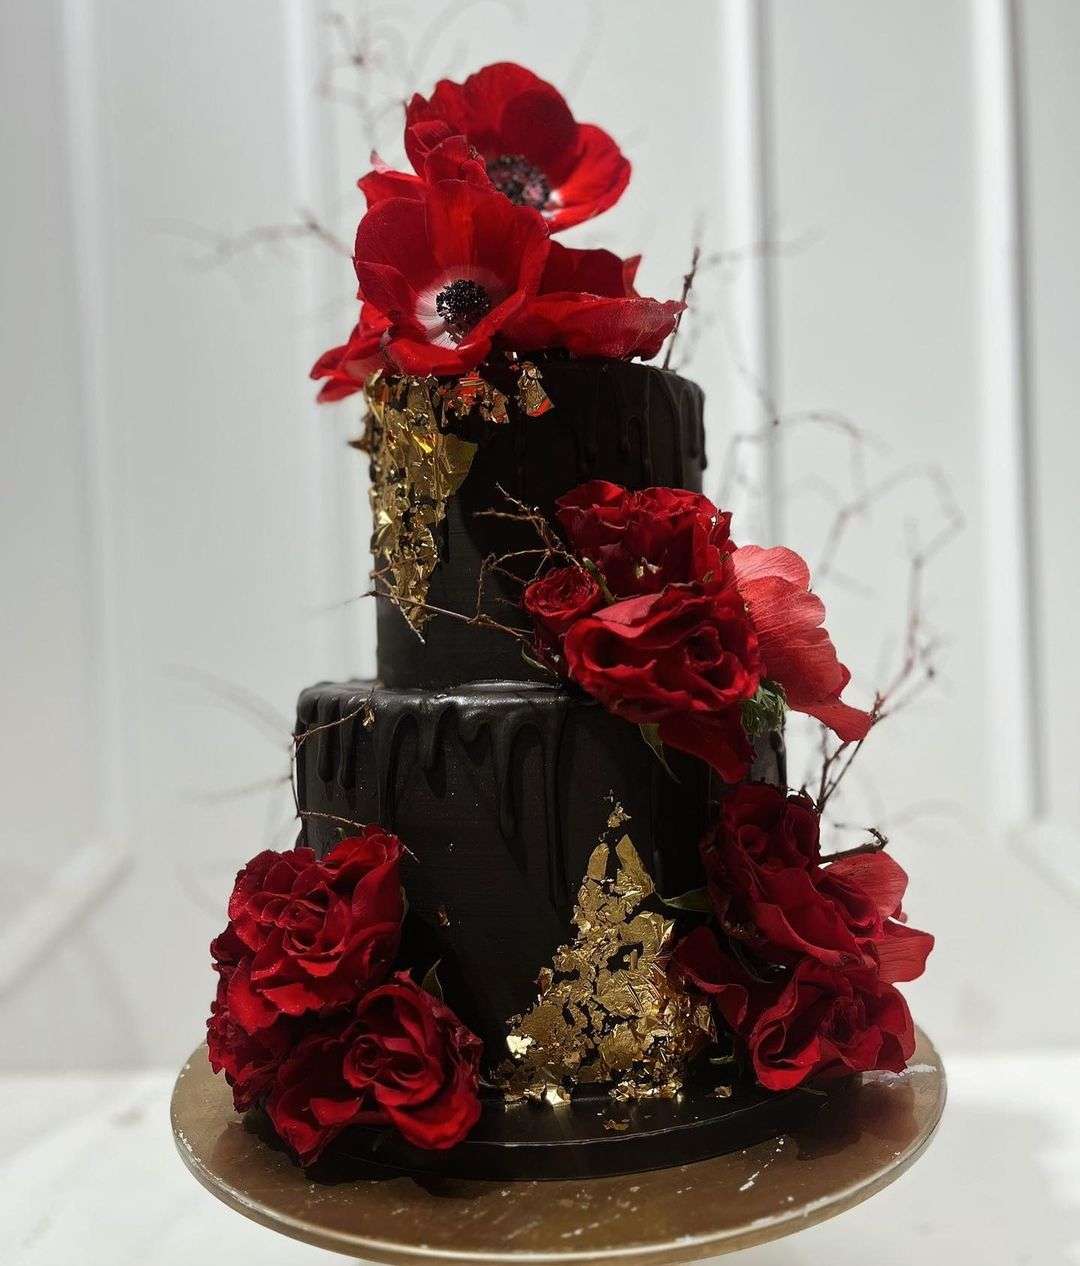 black wedding cake with gold foil and red flowers via magnoliaslastice.cakes